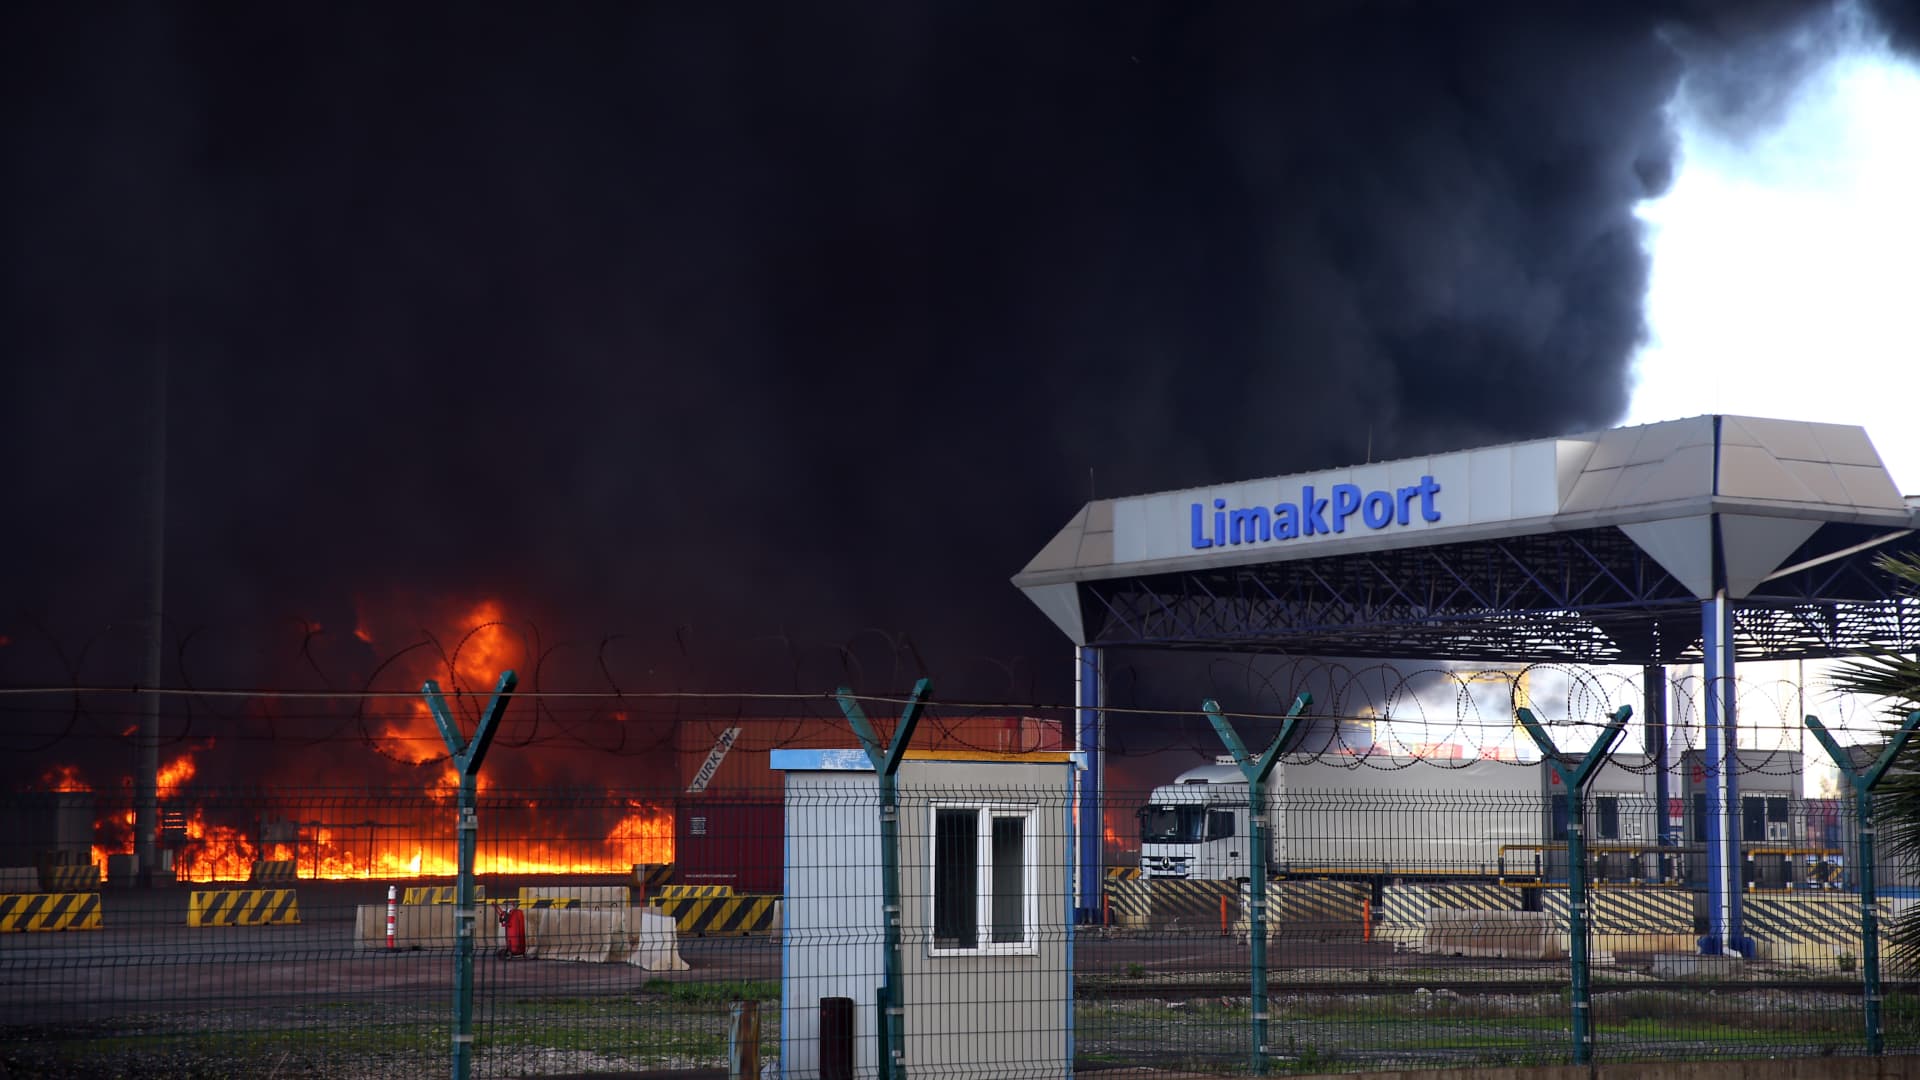 Fire in the containers that overturned after the earthquake in the Iskenderun Port continues in Hatay, after major earthquakes hit Kahramanmaras, Turkey on February 7, 2023.